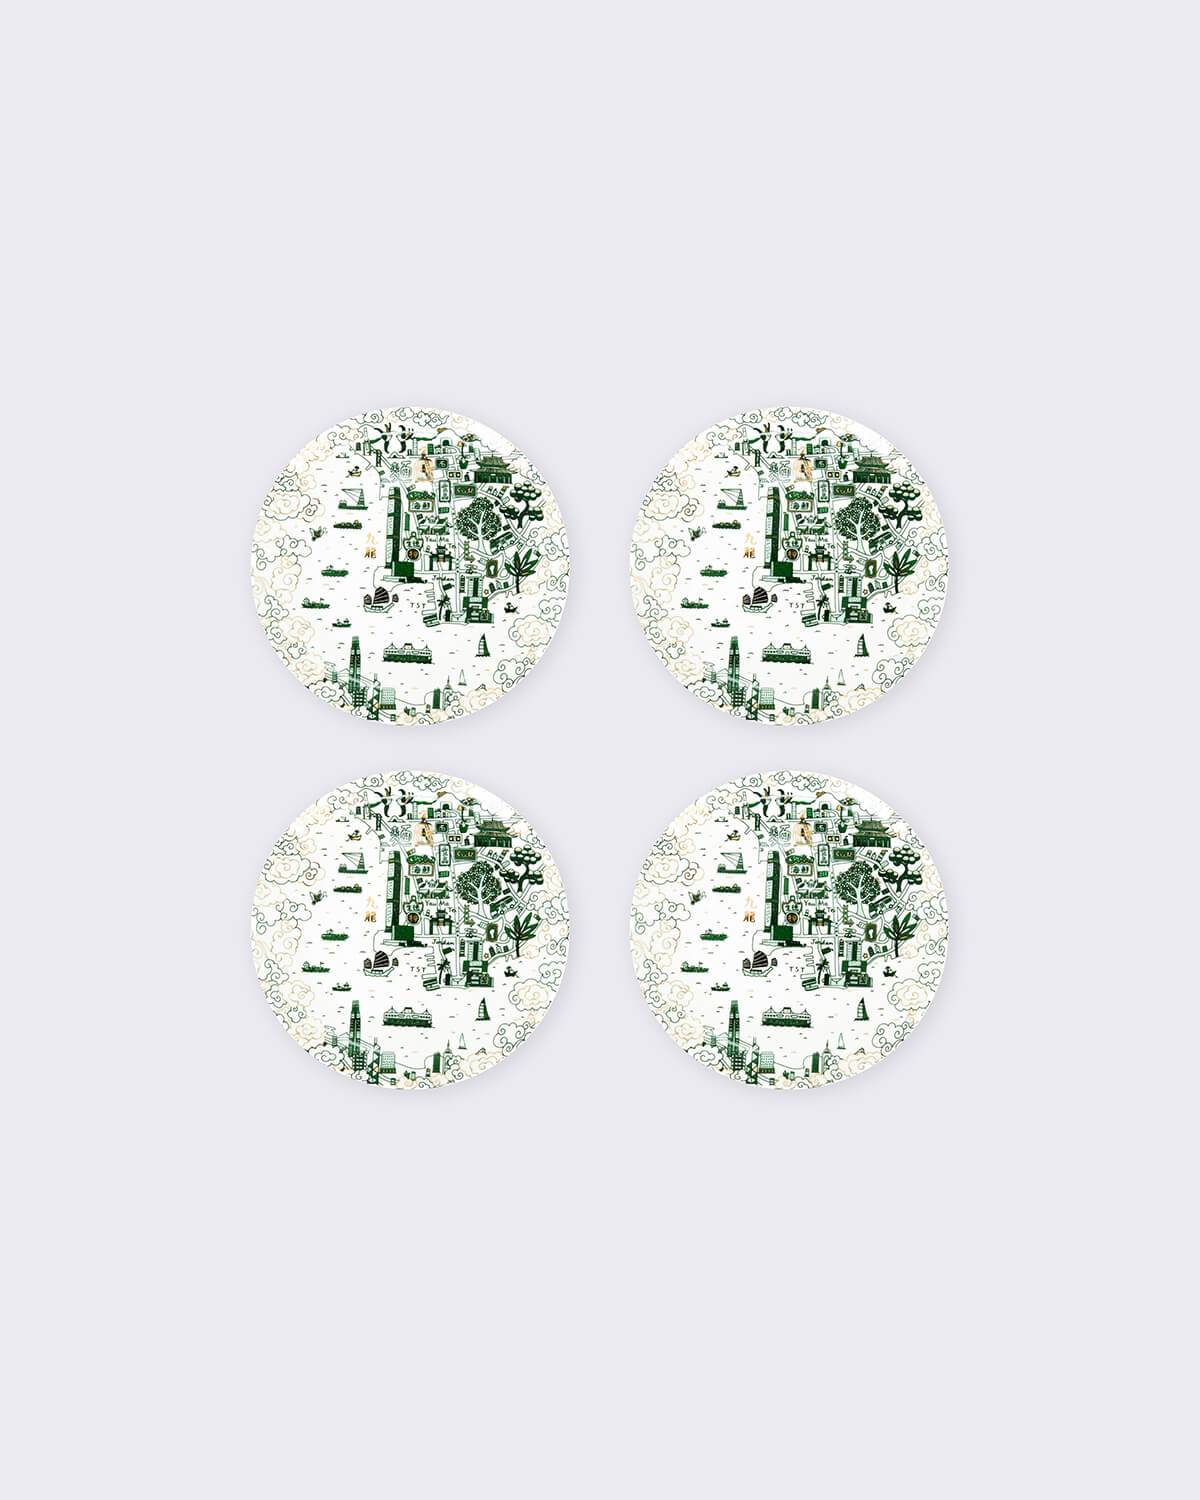 Faux Kowloon Willow 8" Starter Plates (Set of 4) - Green & Gold 